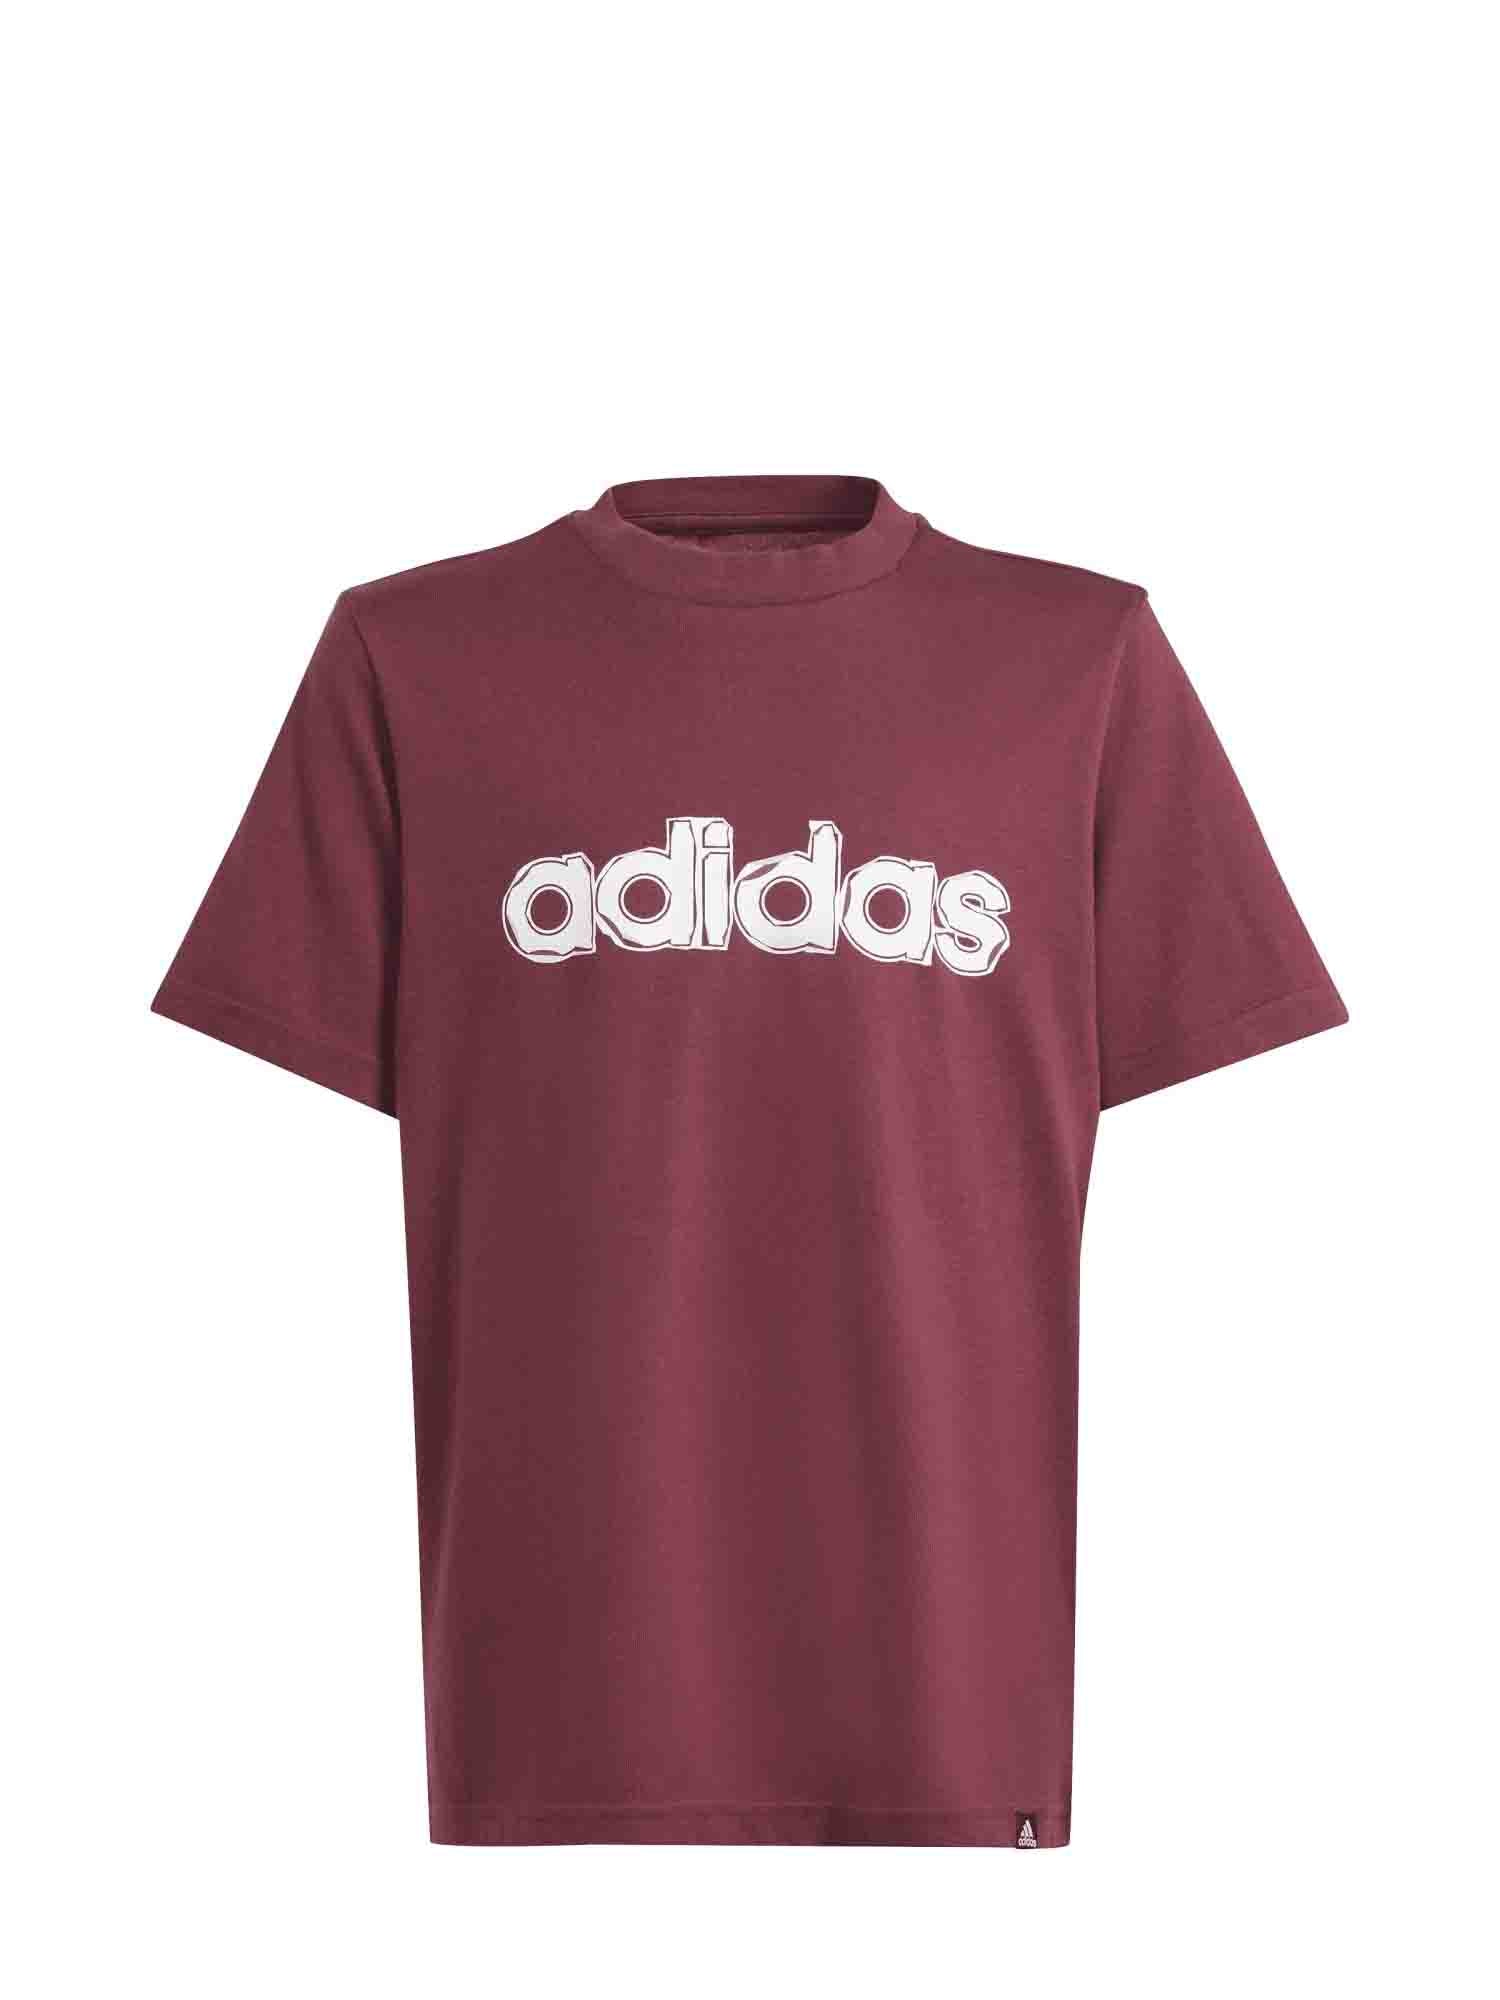 ADIDAS TABLE TEE FOLDED GRAPHIC T-SHIRT JUNIOR BORDEAUX